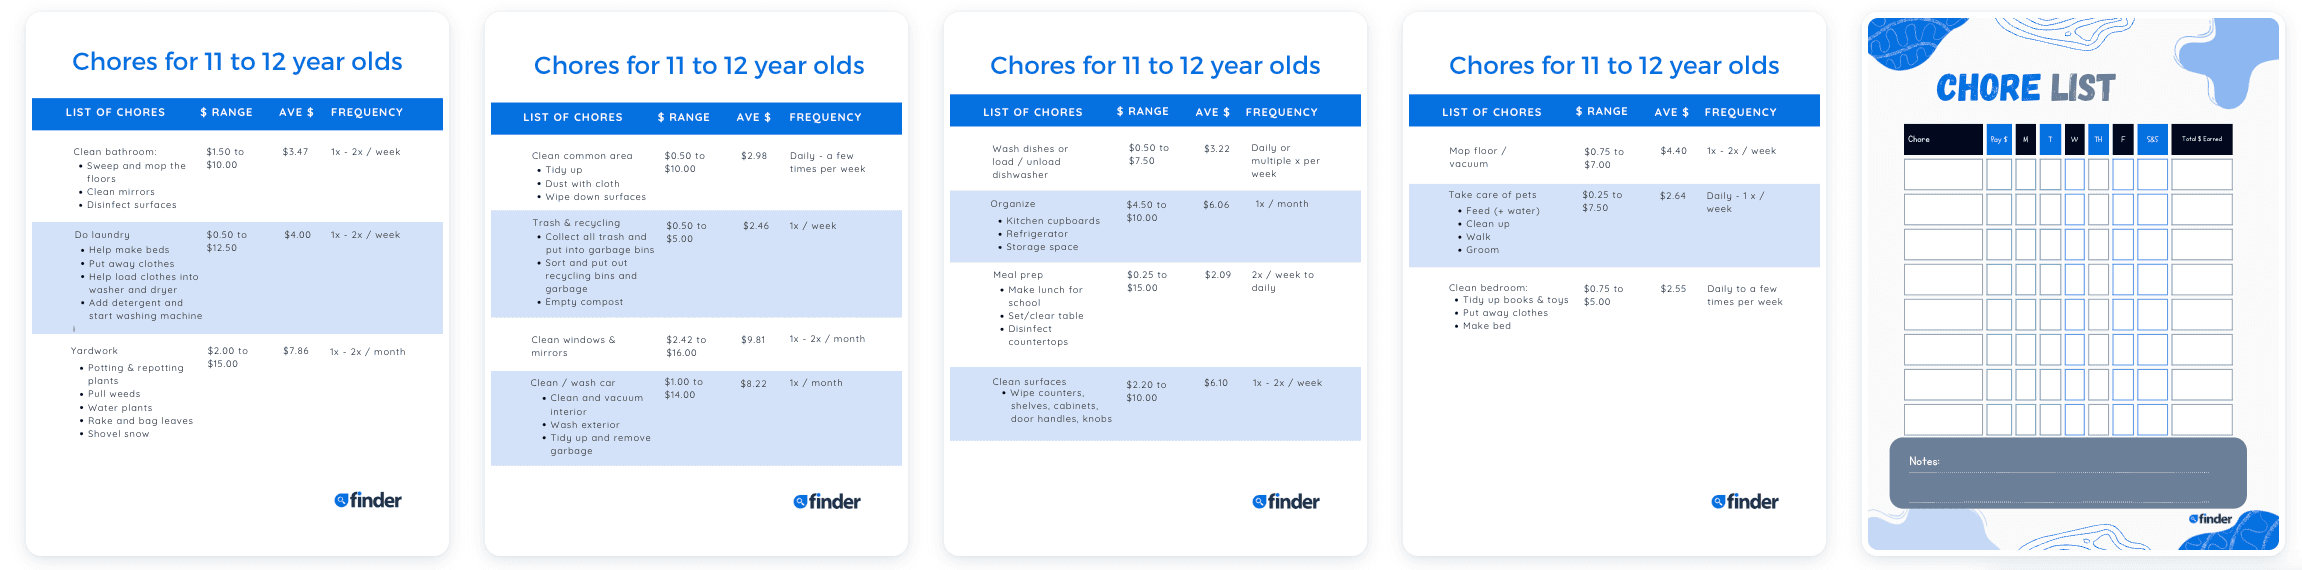 Download a printable PDF of chores for 11 and 12 year olds + chore price list and chore pay scale